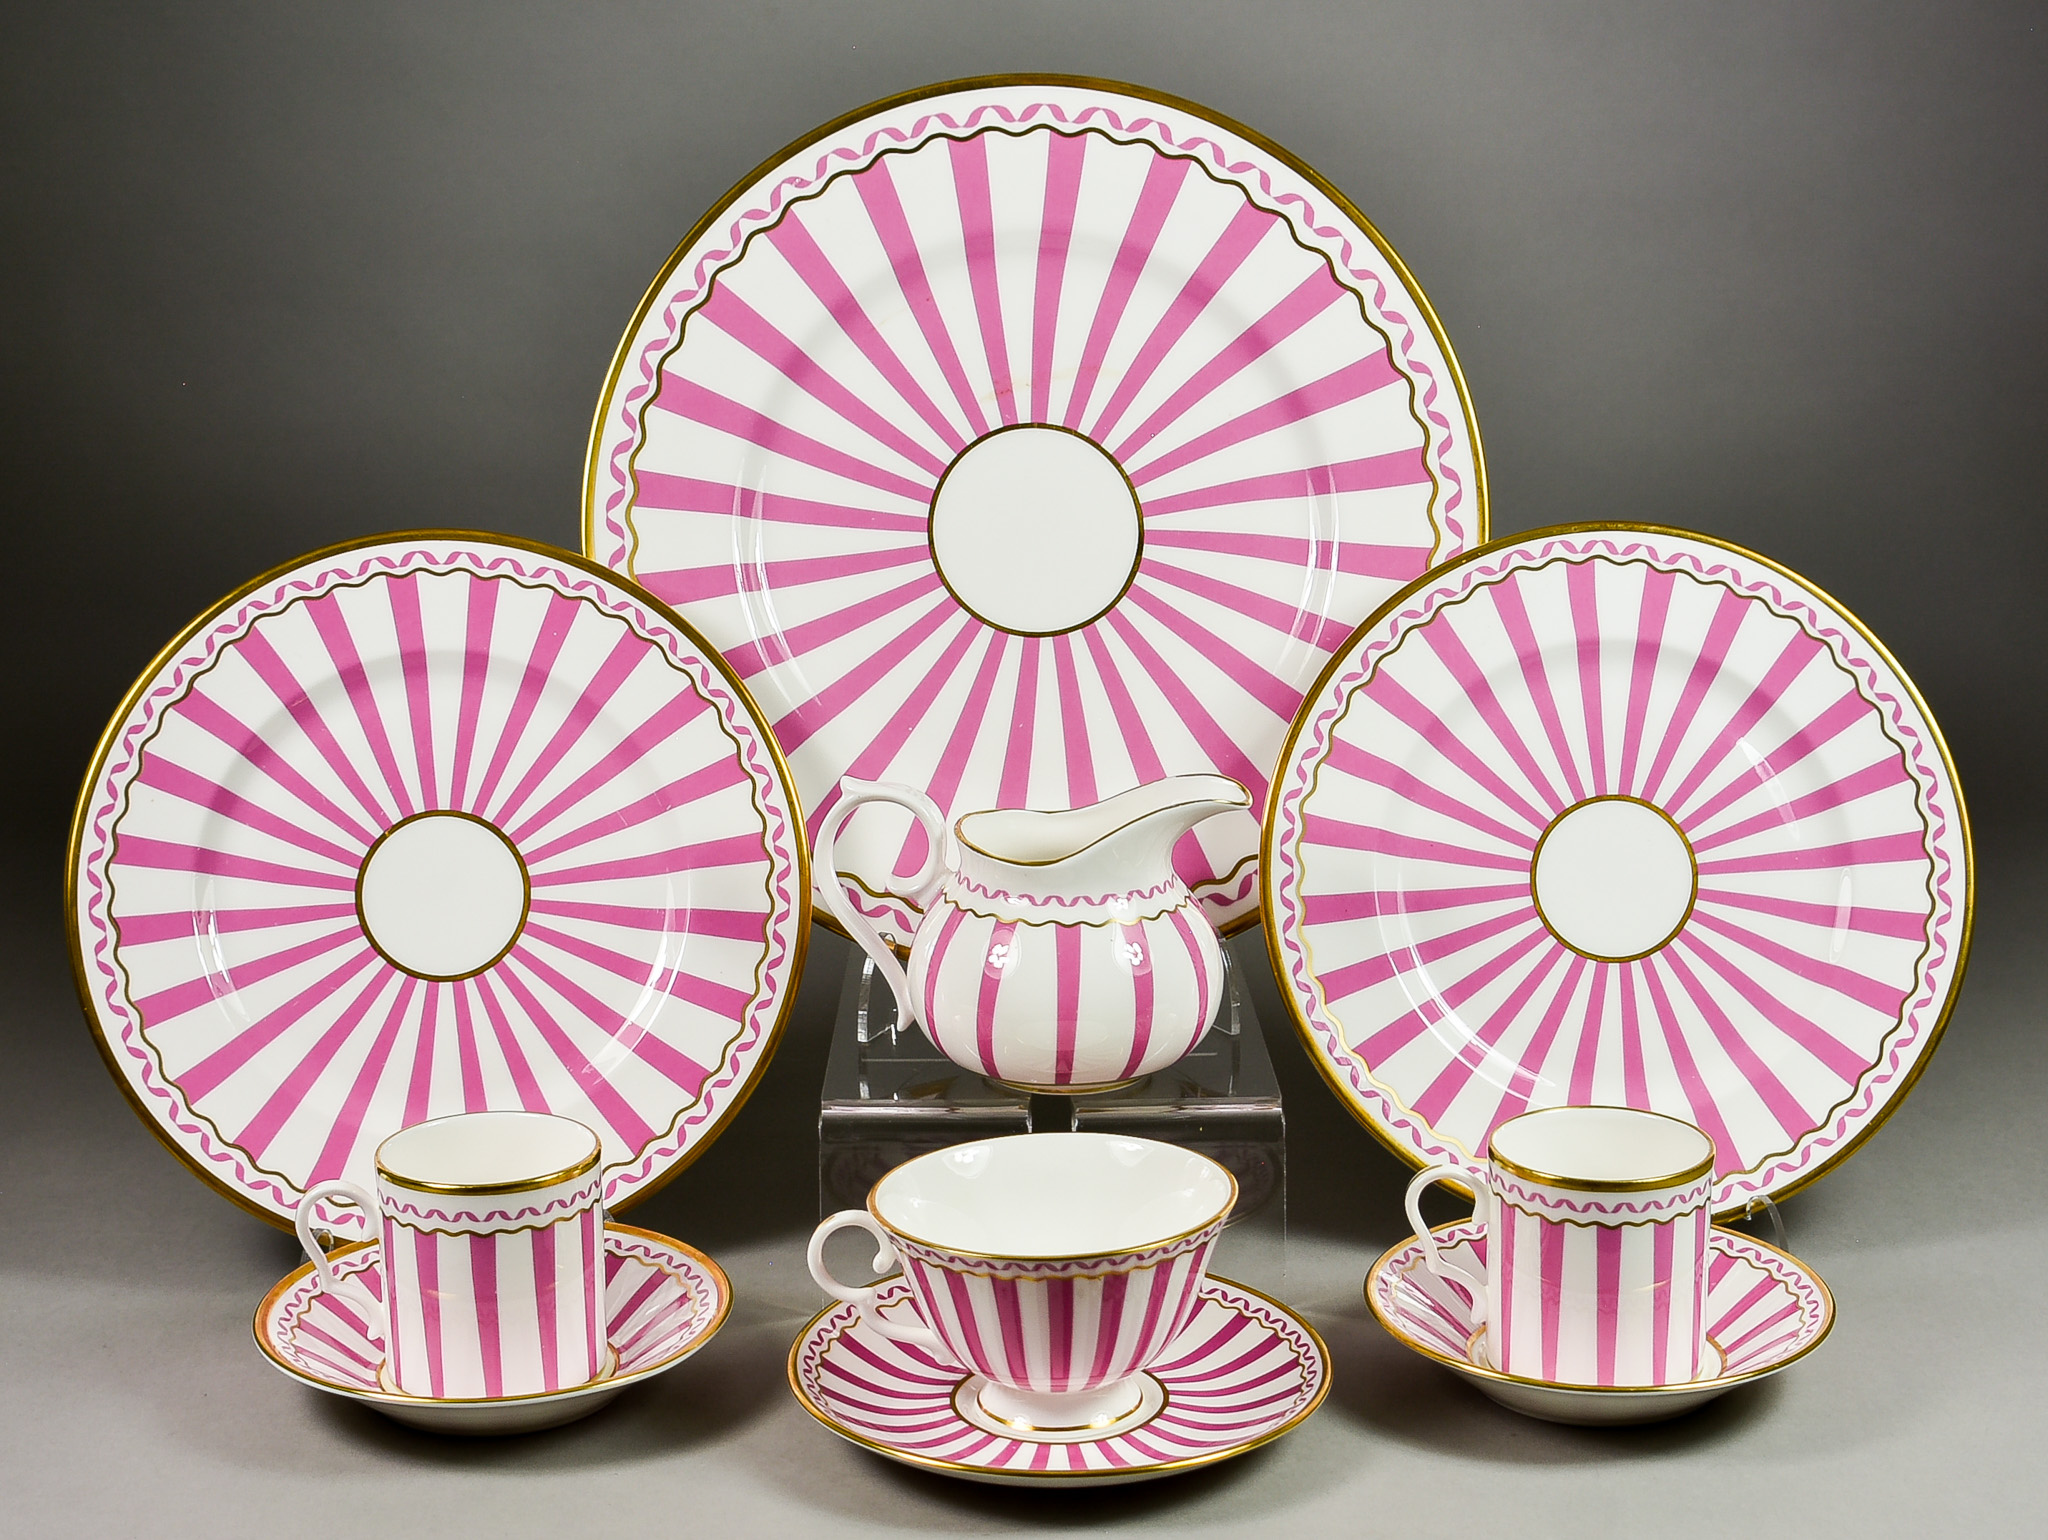 A Thomas Goode "Carousel" Pattern Part Tea Service, with gilt and pink detail, comprising - three